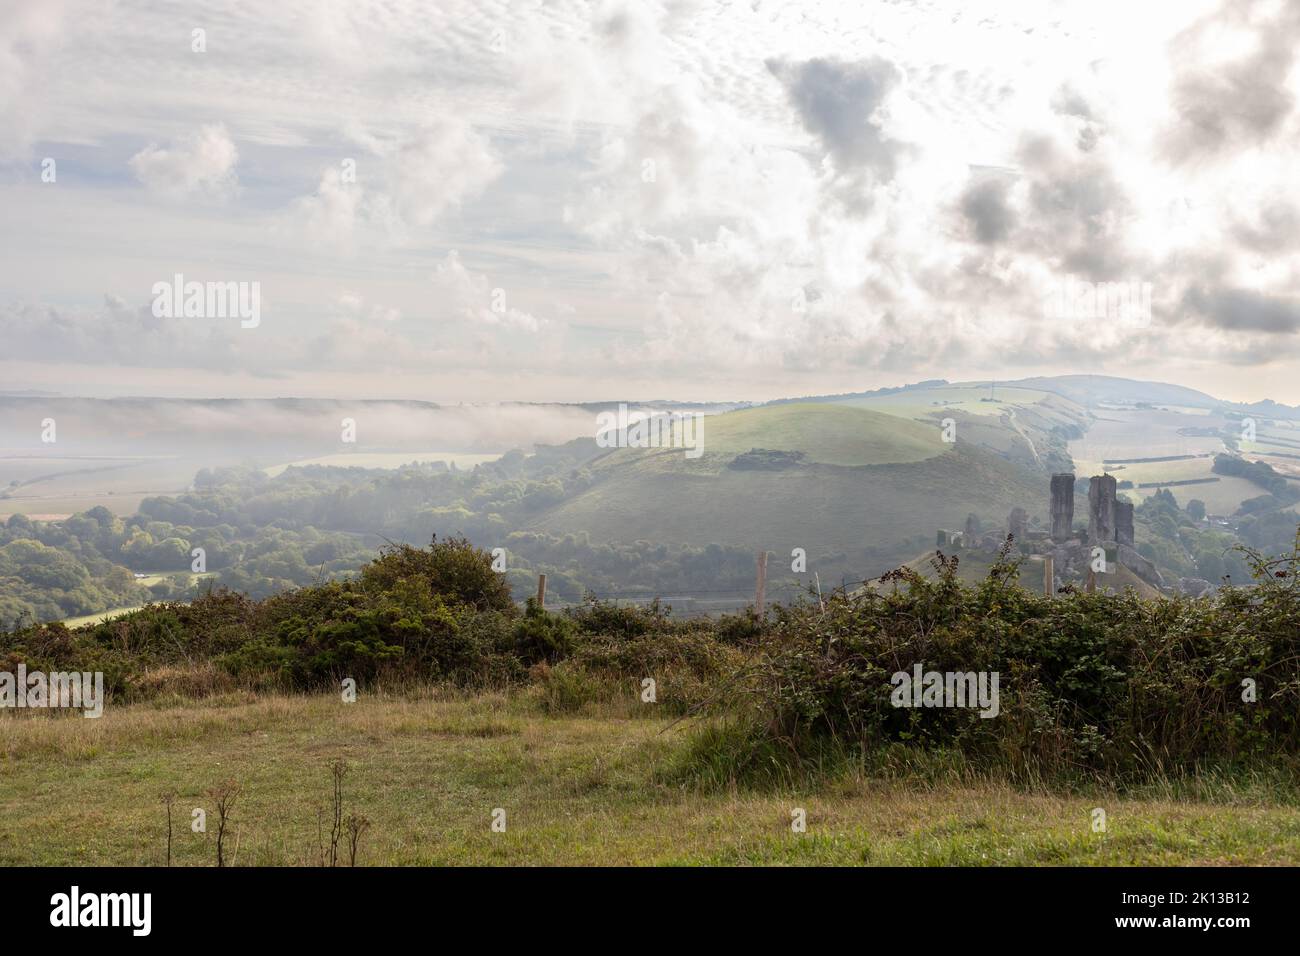 View of the Dorset countryside at Corfe on a misty morning with the castle ruins in the distance, England, UK Stock Photo